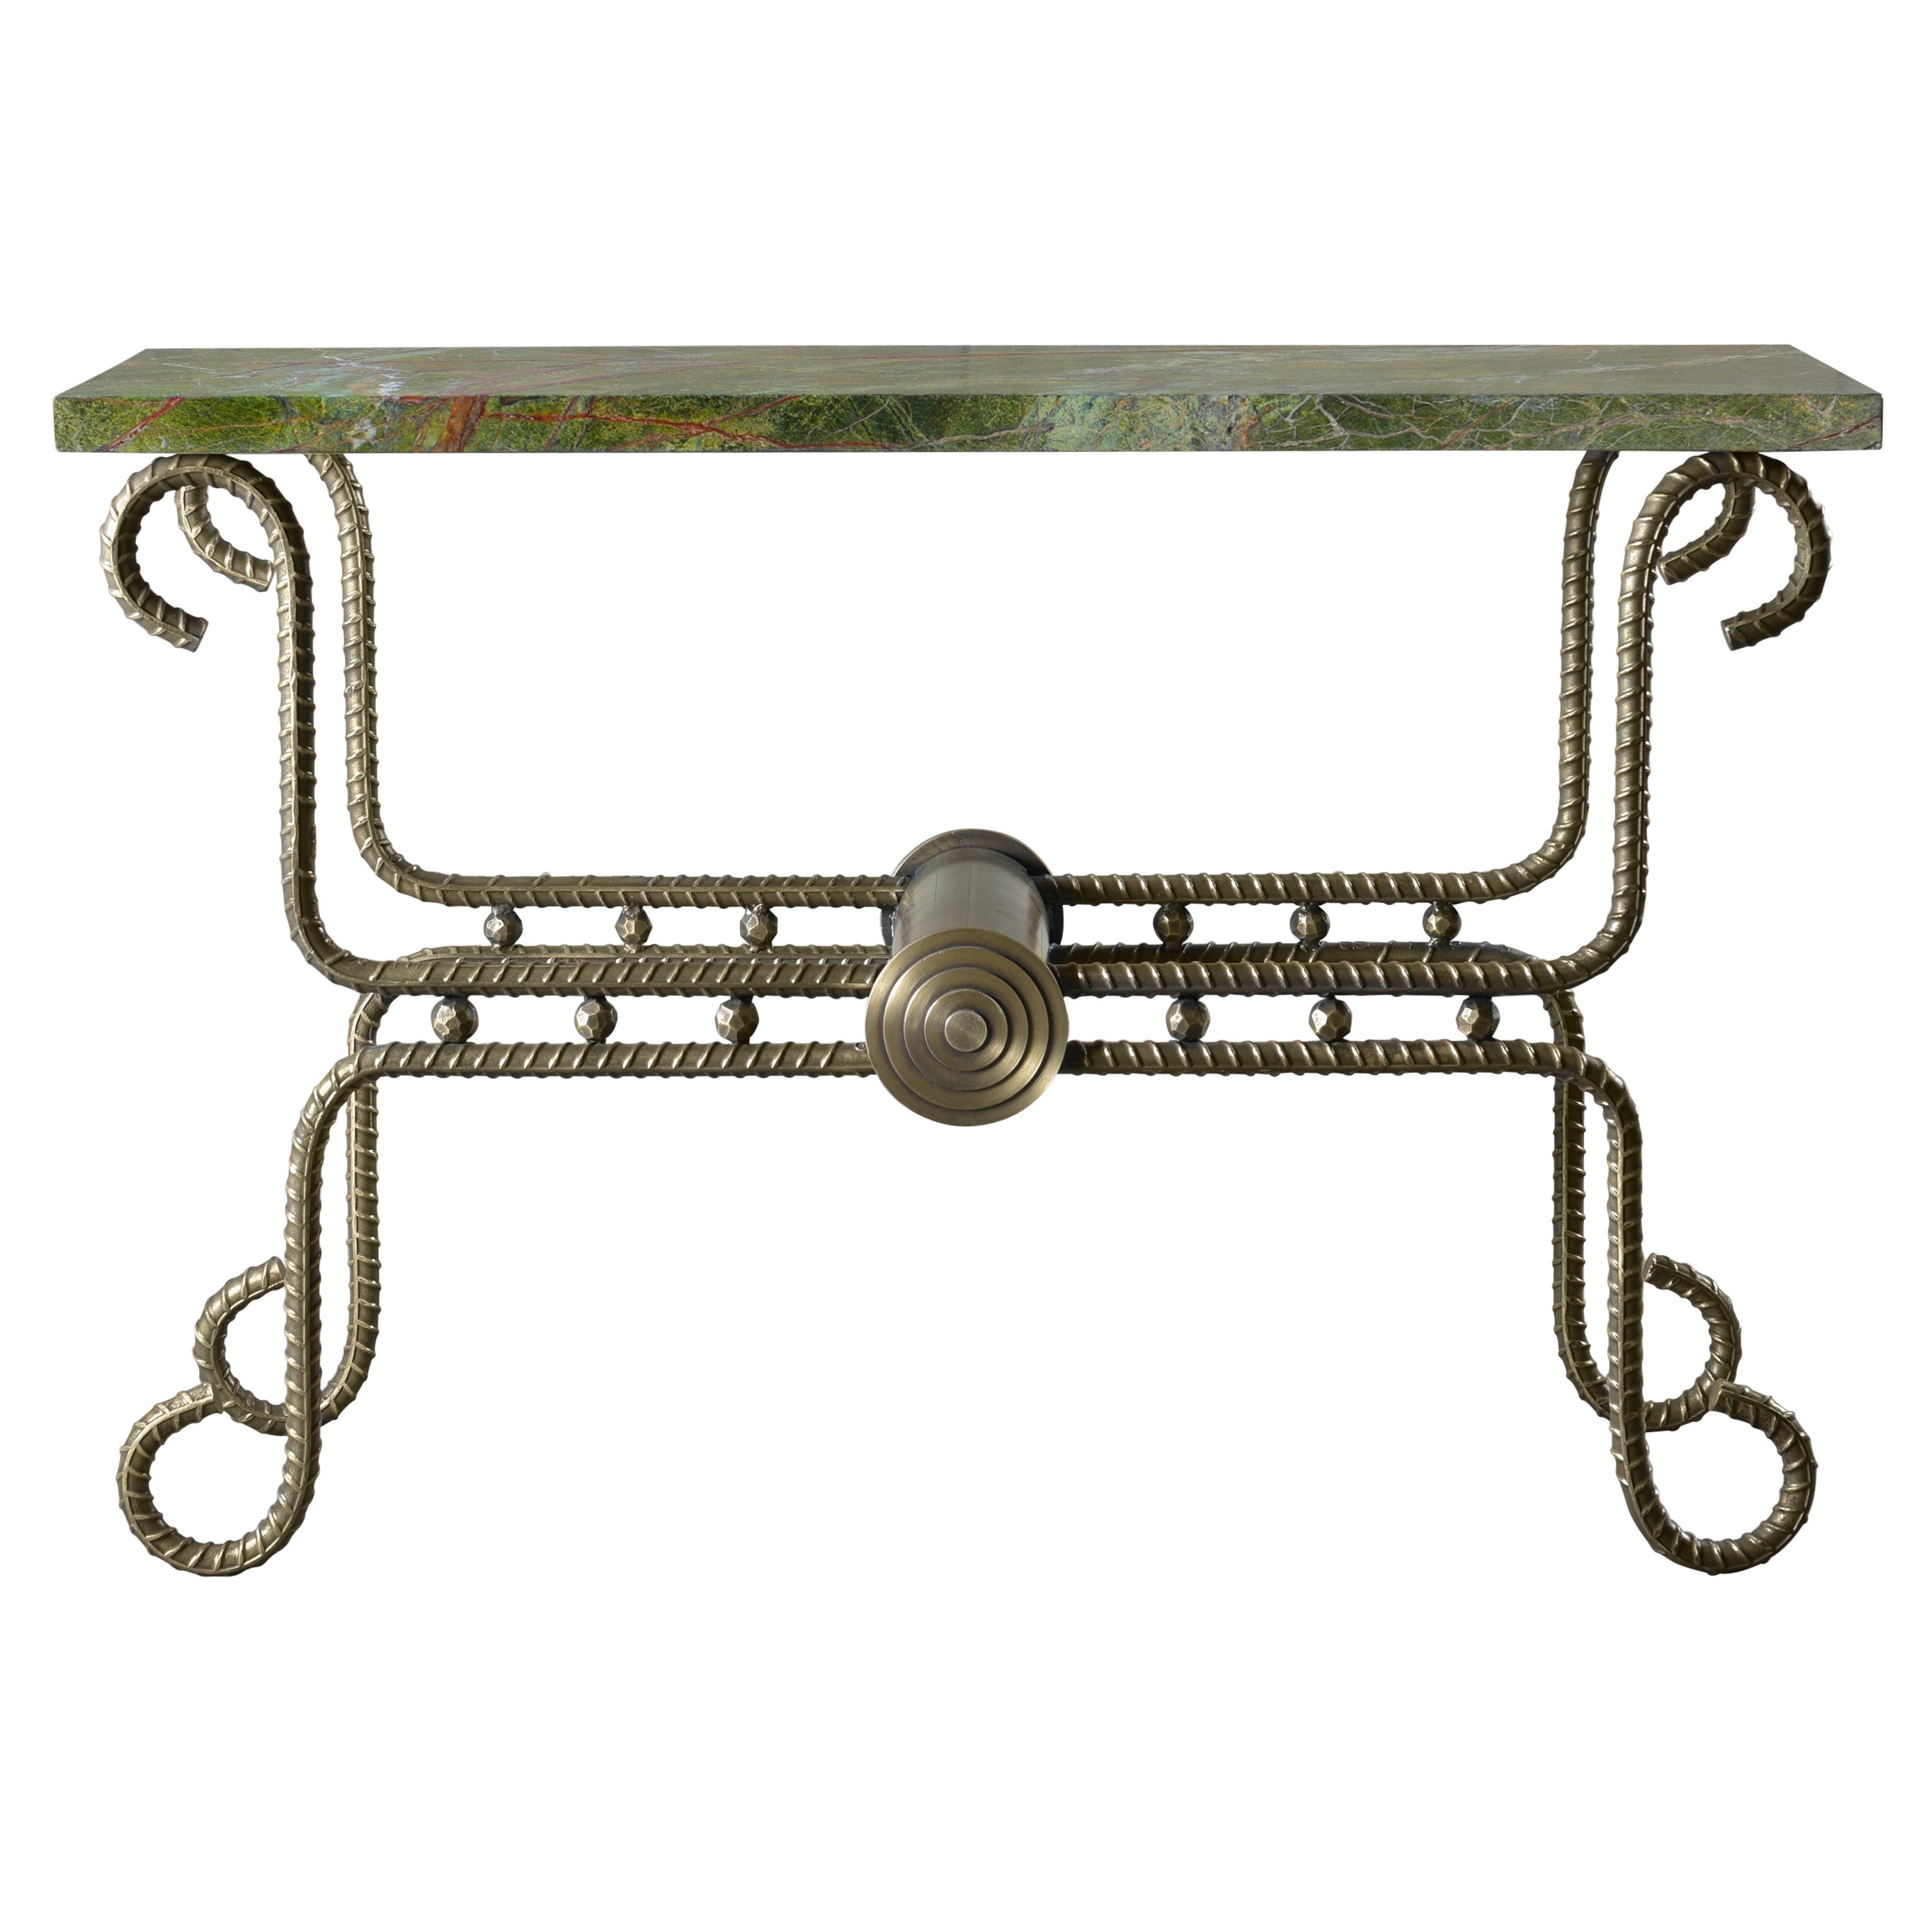 Antique Brass Console With Marble Top Functional Art Collectible Design For Sale